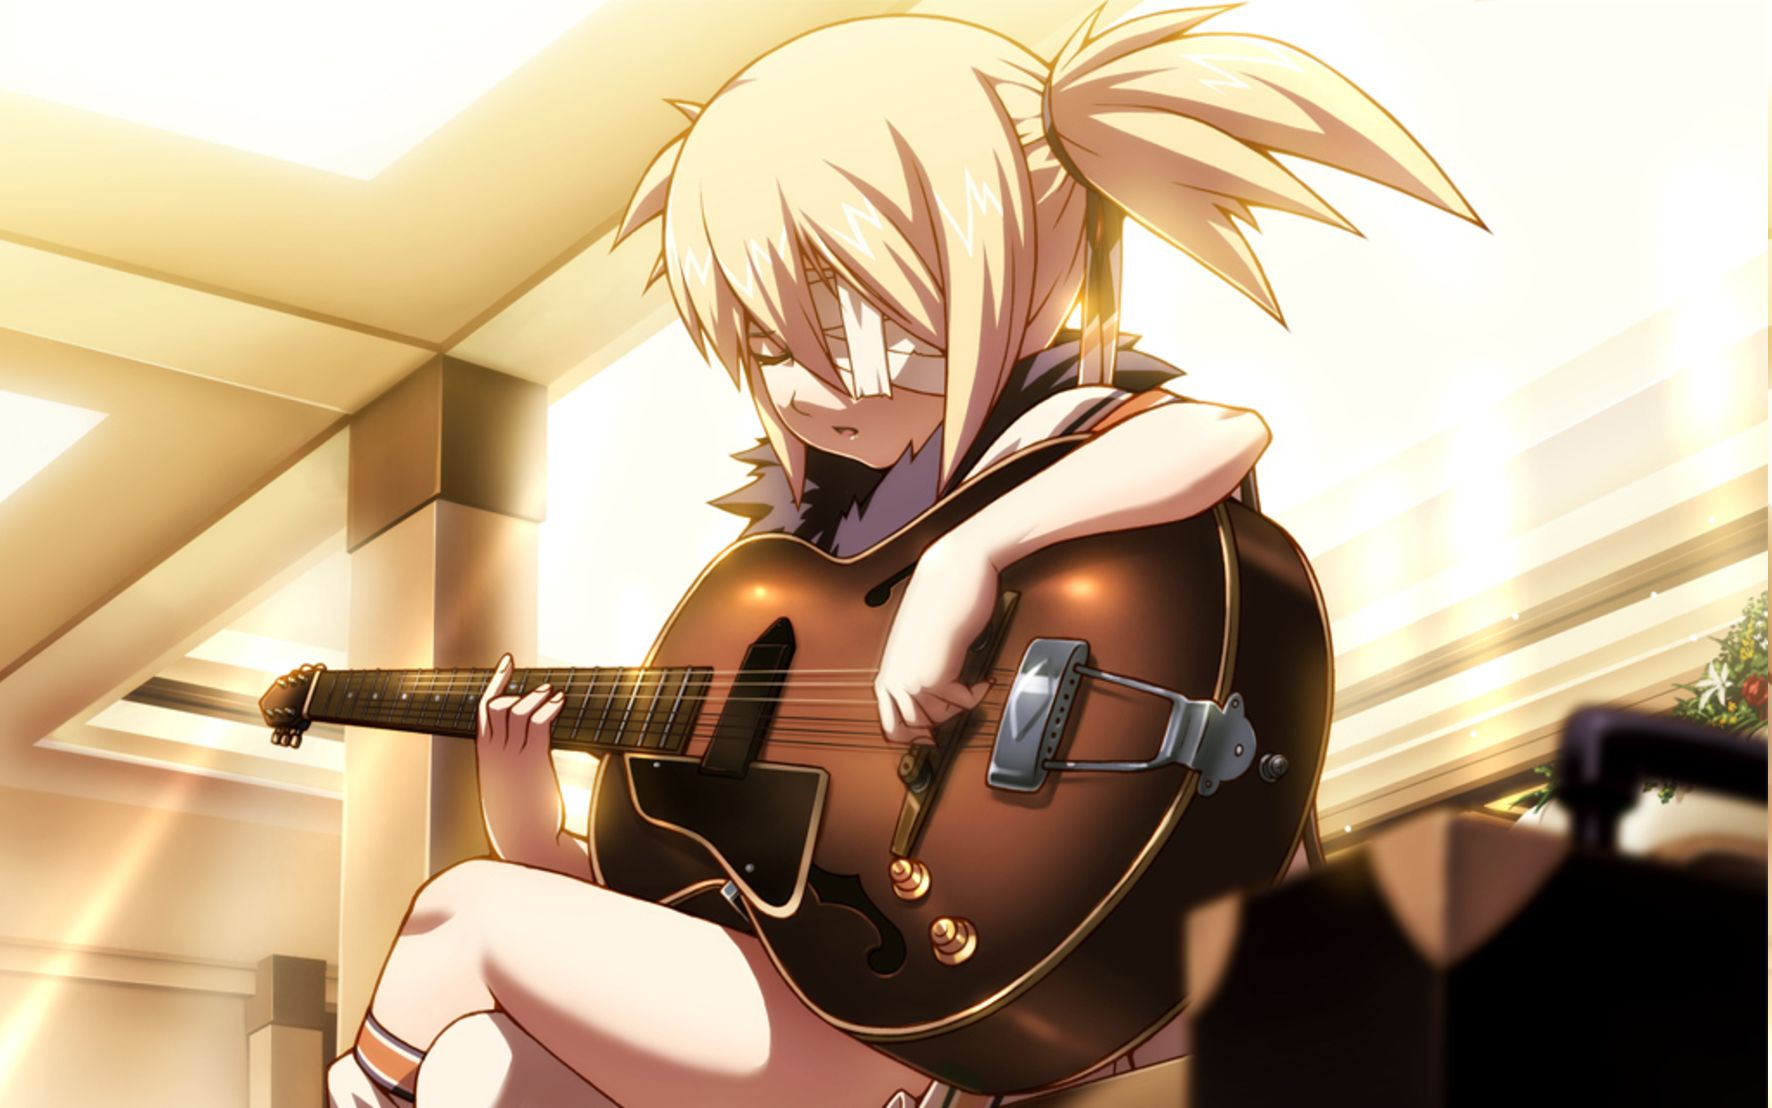 anime girl with acoustic guitar